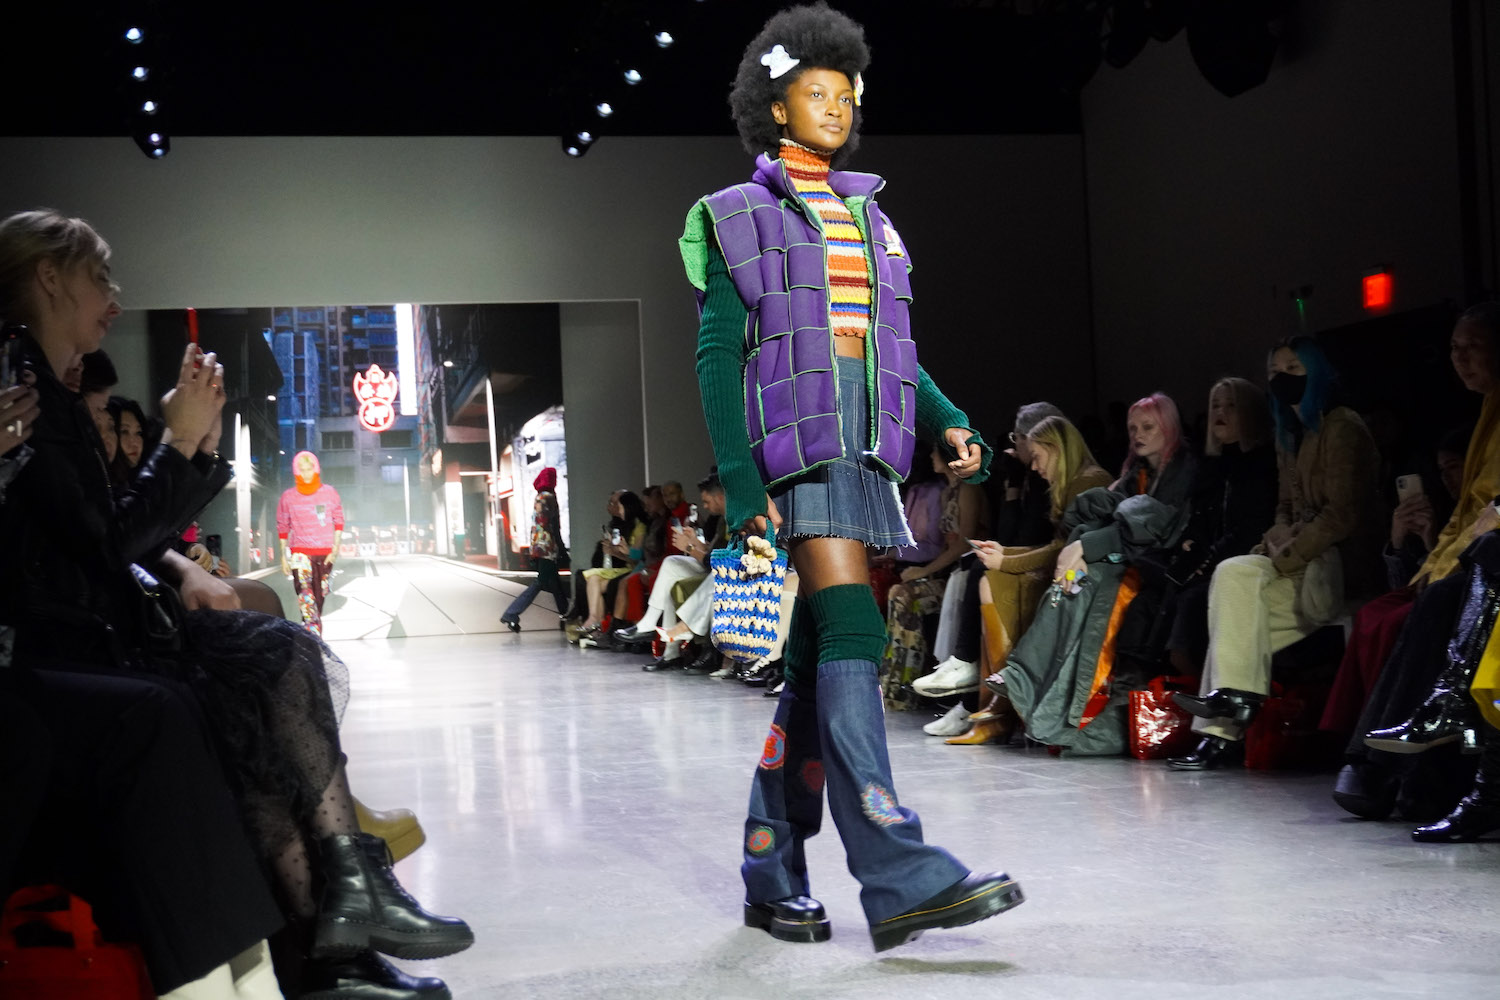 A model walks down the runway wearing a striped sweater, a purple woven jacket with green sleeves, high green socks, denim leg warmers, a blue-and-white crocheted bag and black boots.